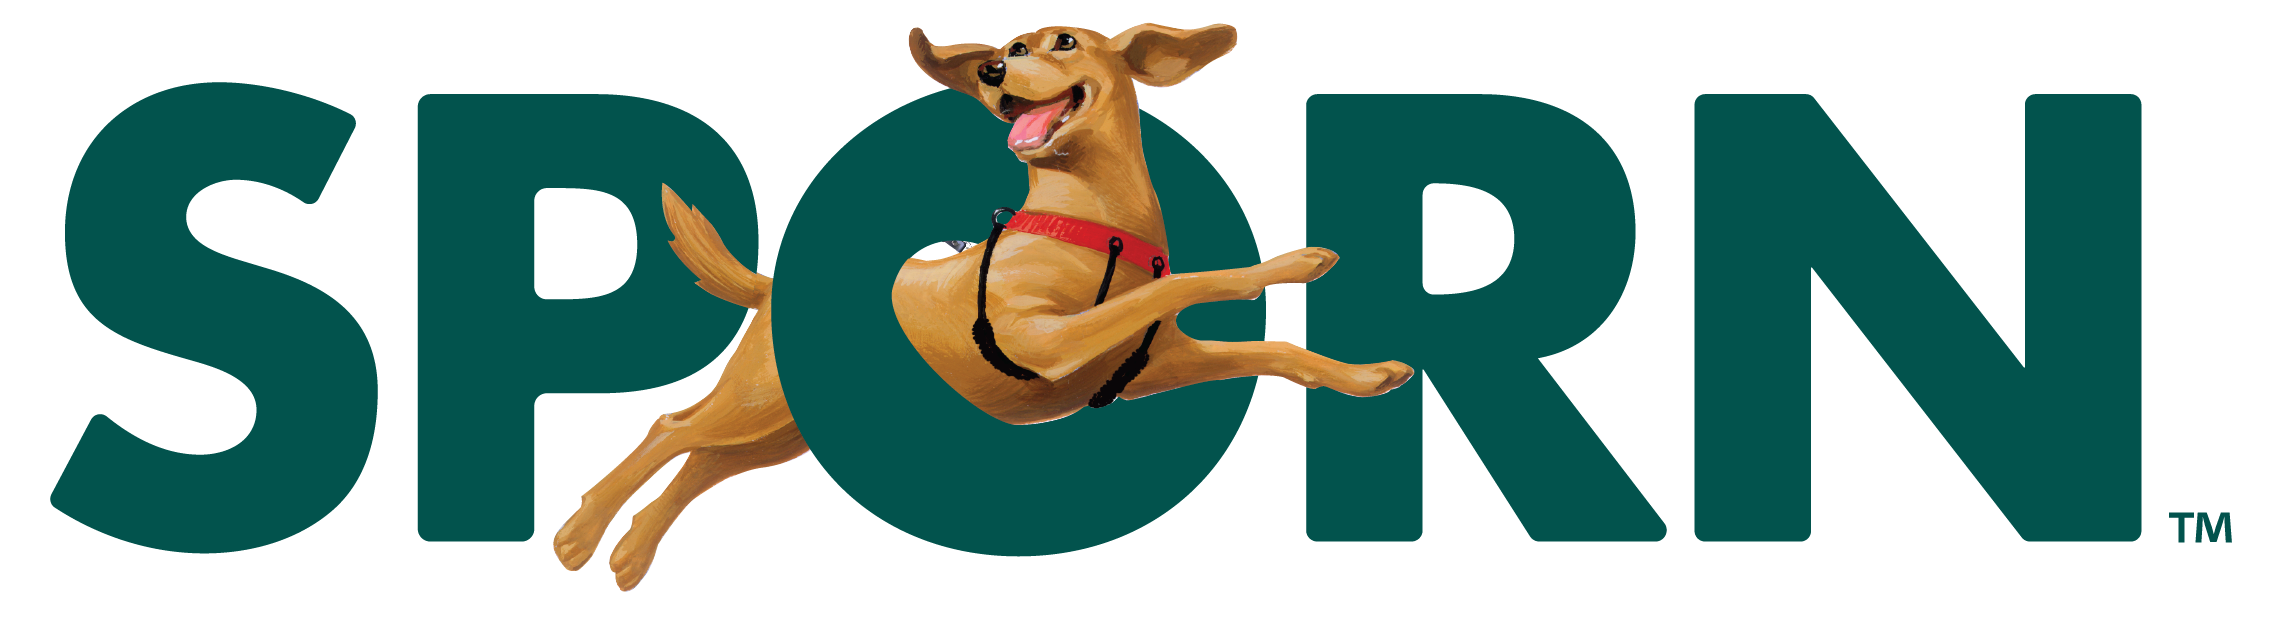 Xxxsporn - THE SPORN COMPANY PRESENTS AN EXCITING NEW RANGE OF DOG HARNESSES AND  ACCESSORIES